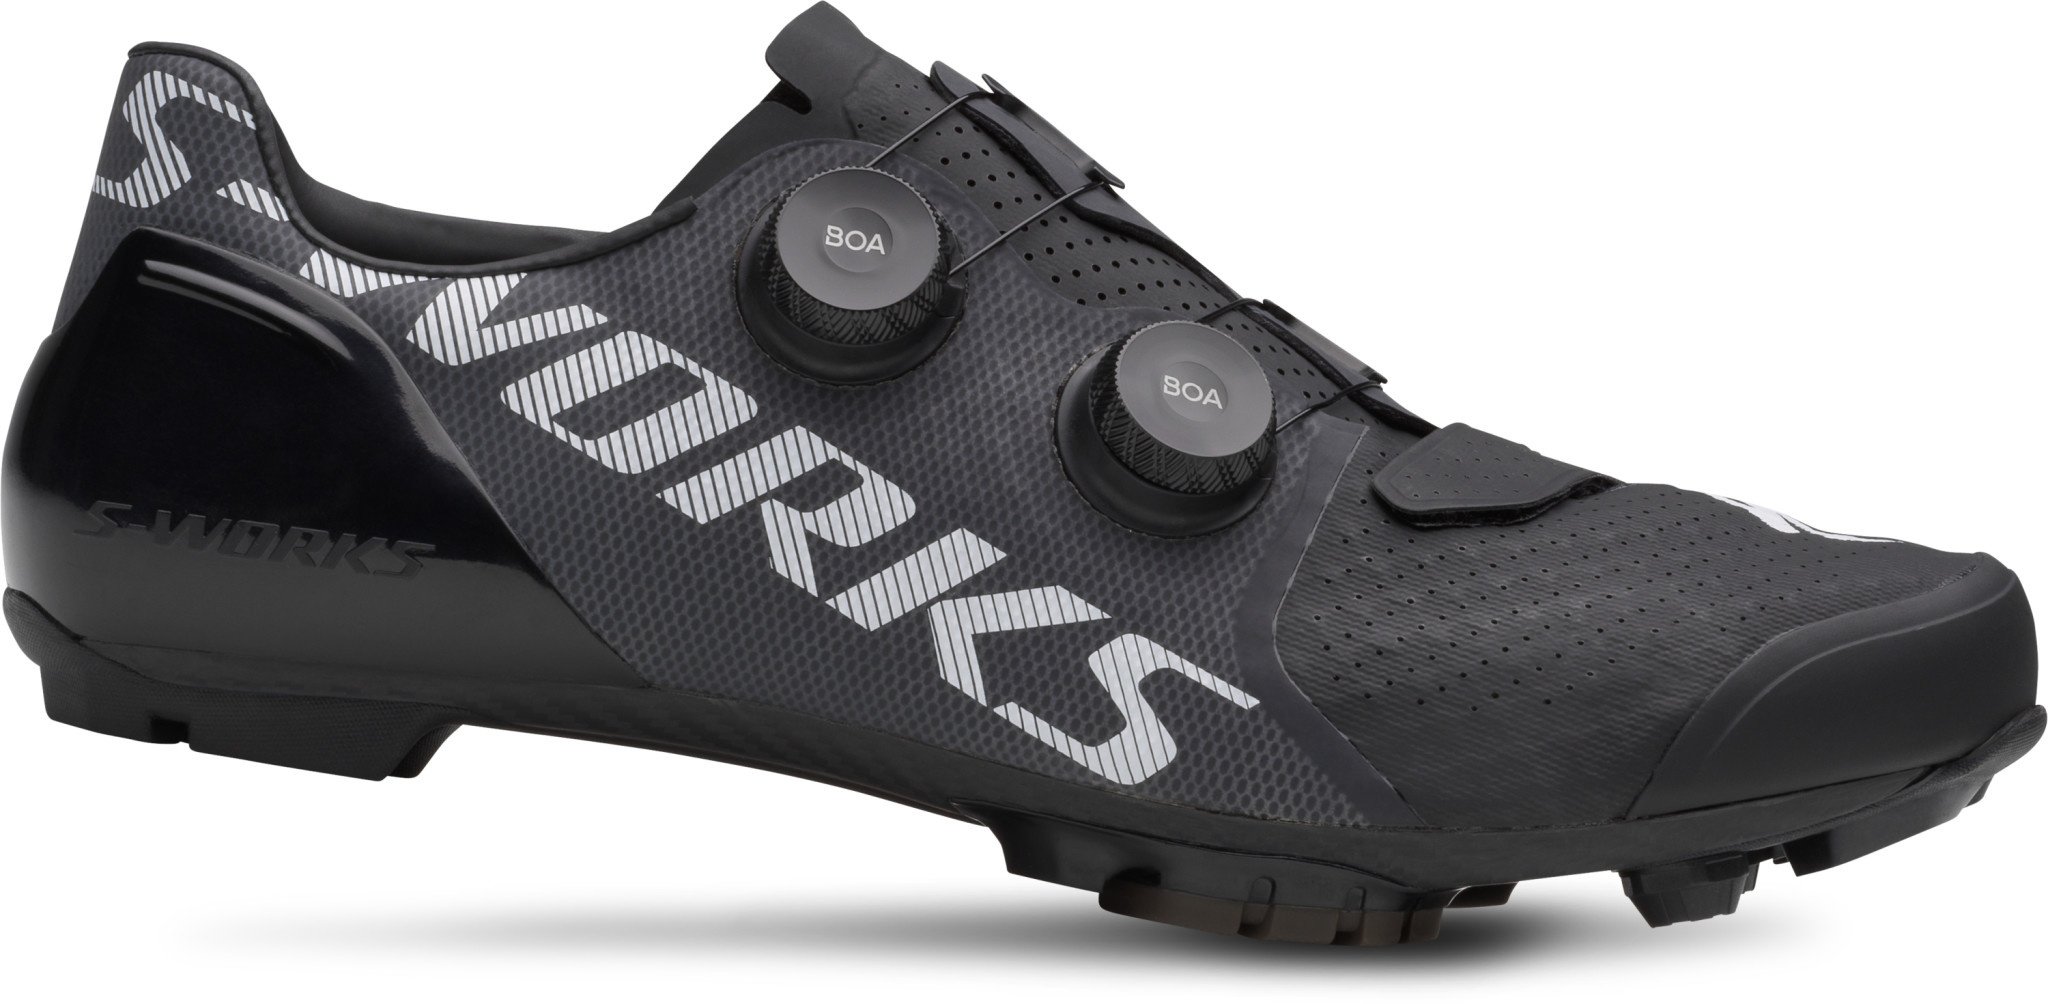 specialized s works mtb shoes